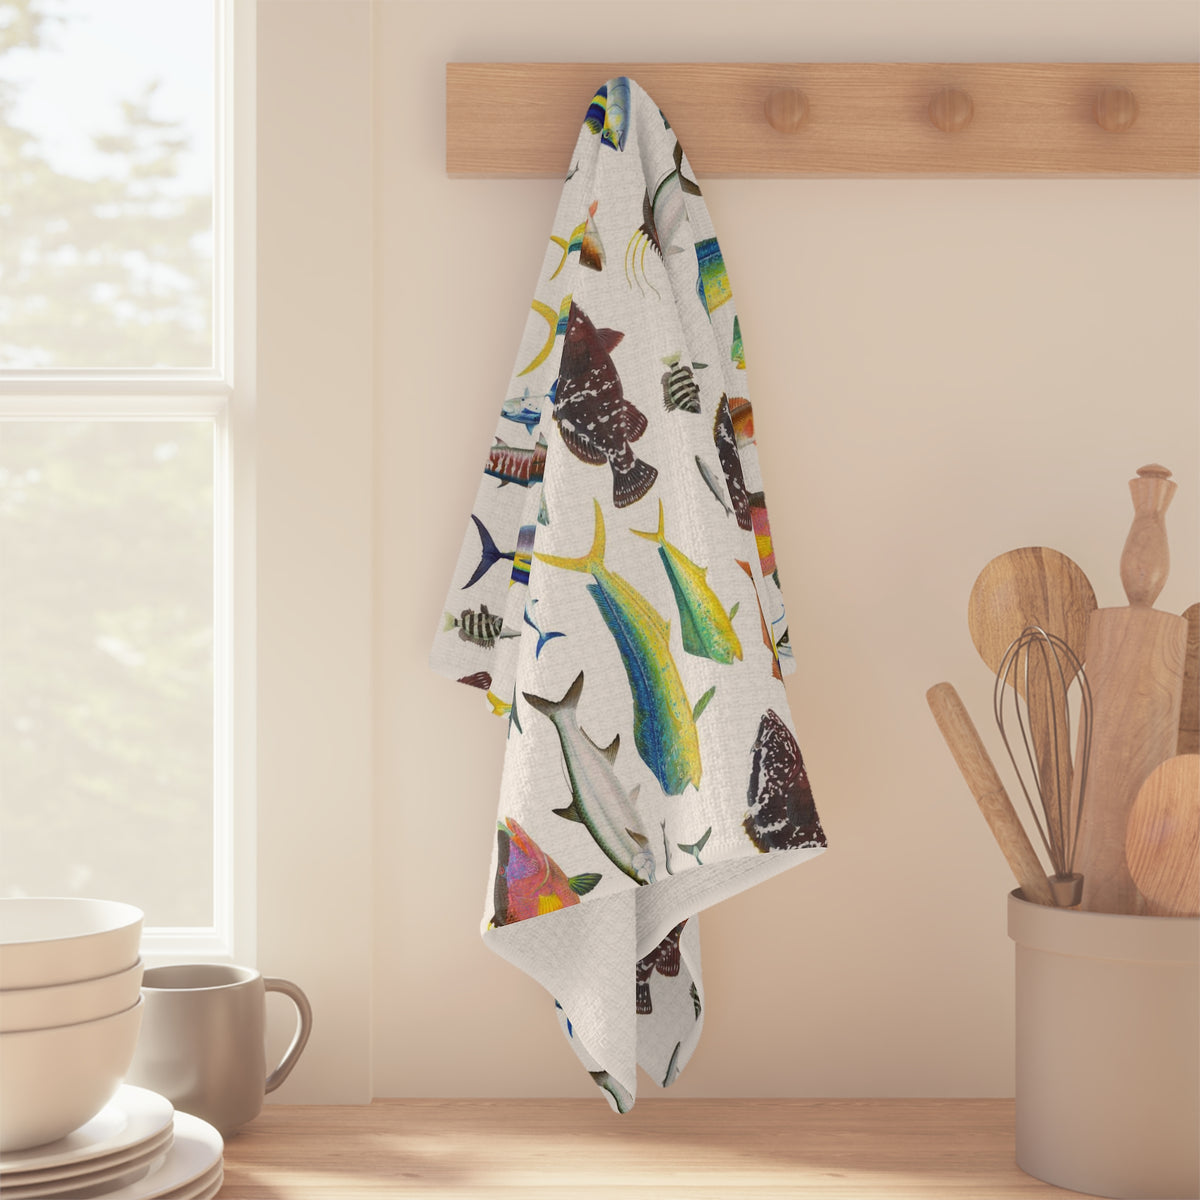 Southern Offshore Fish White Soft Kitchen Towel